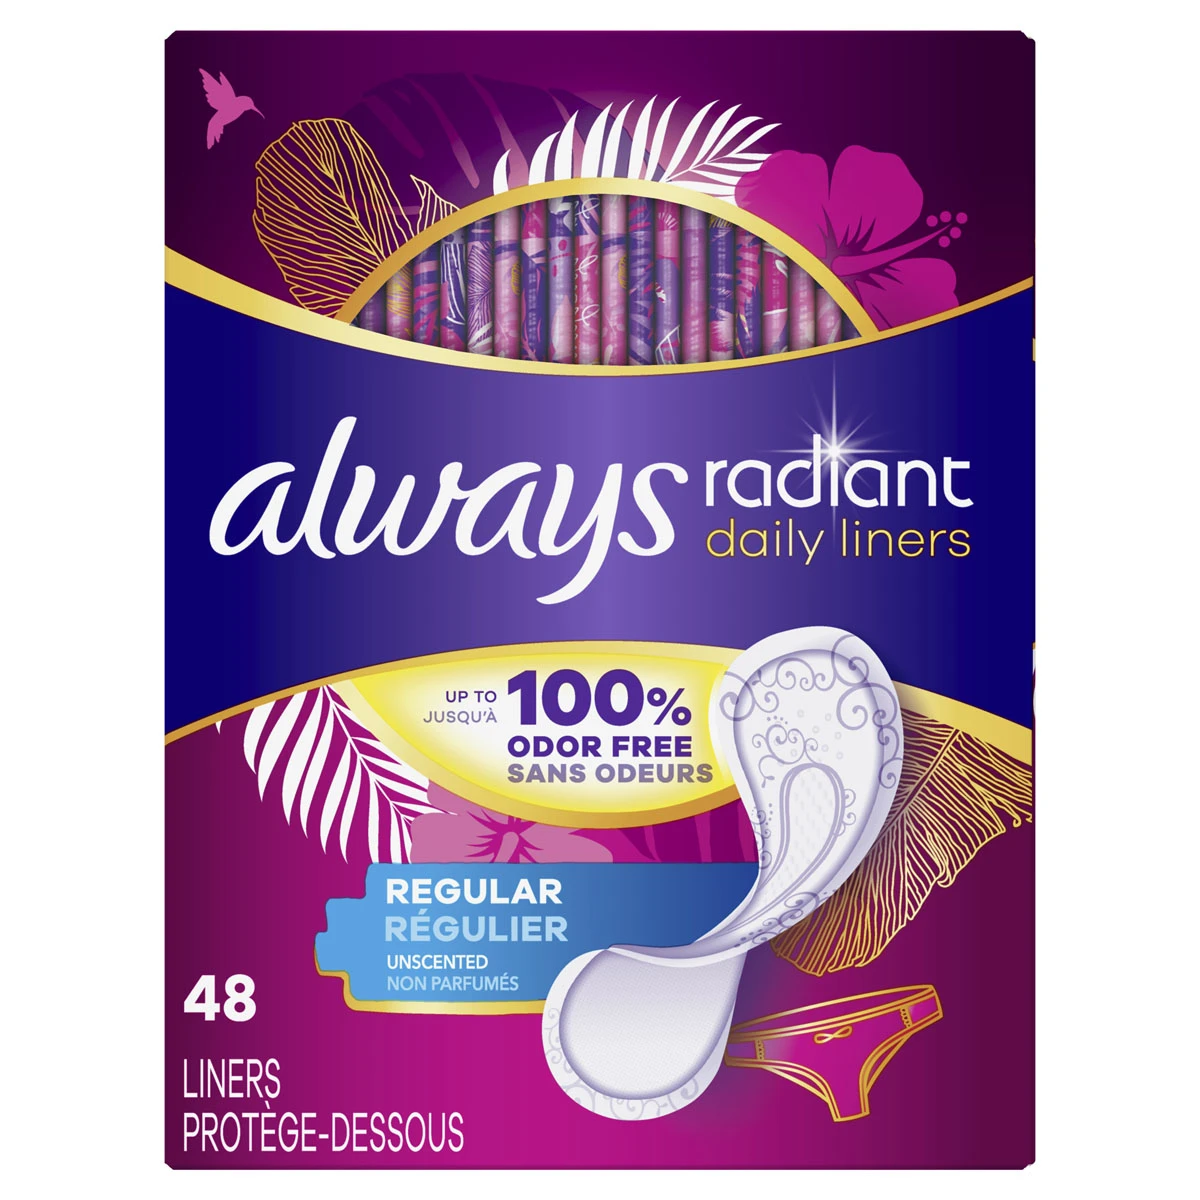 Product-Always Radiant Daily Liners, Regular, Wrapped